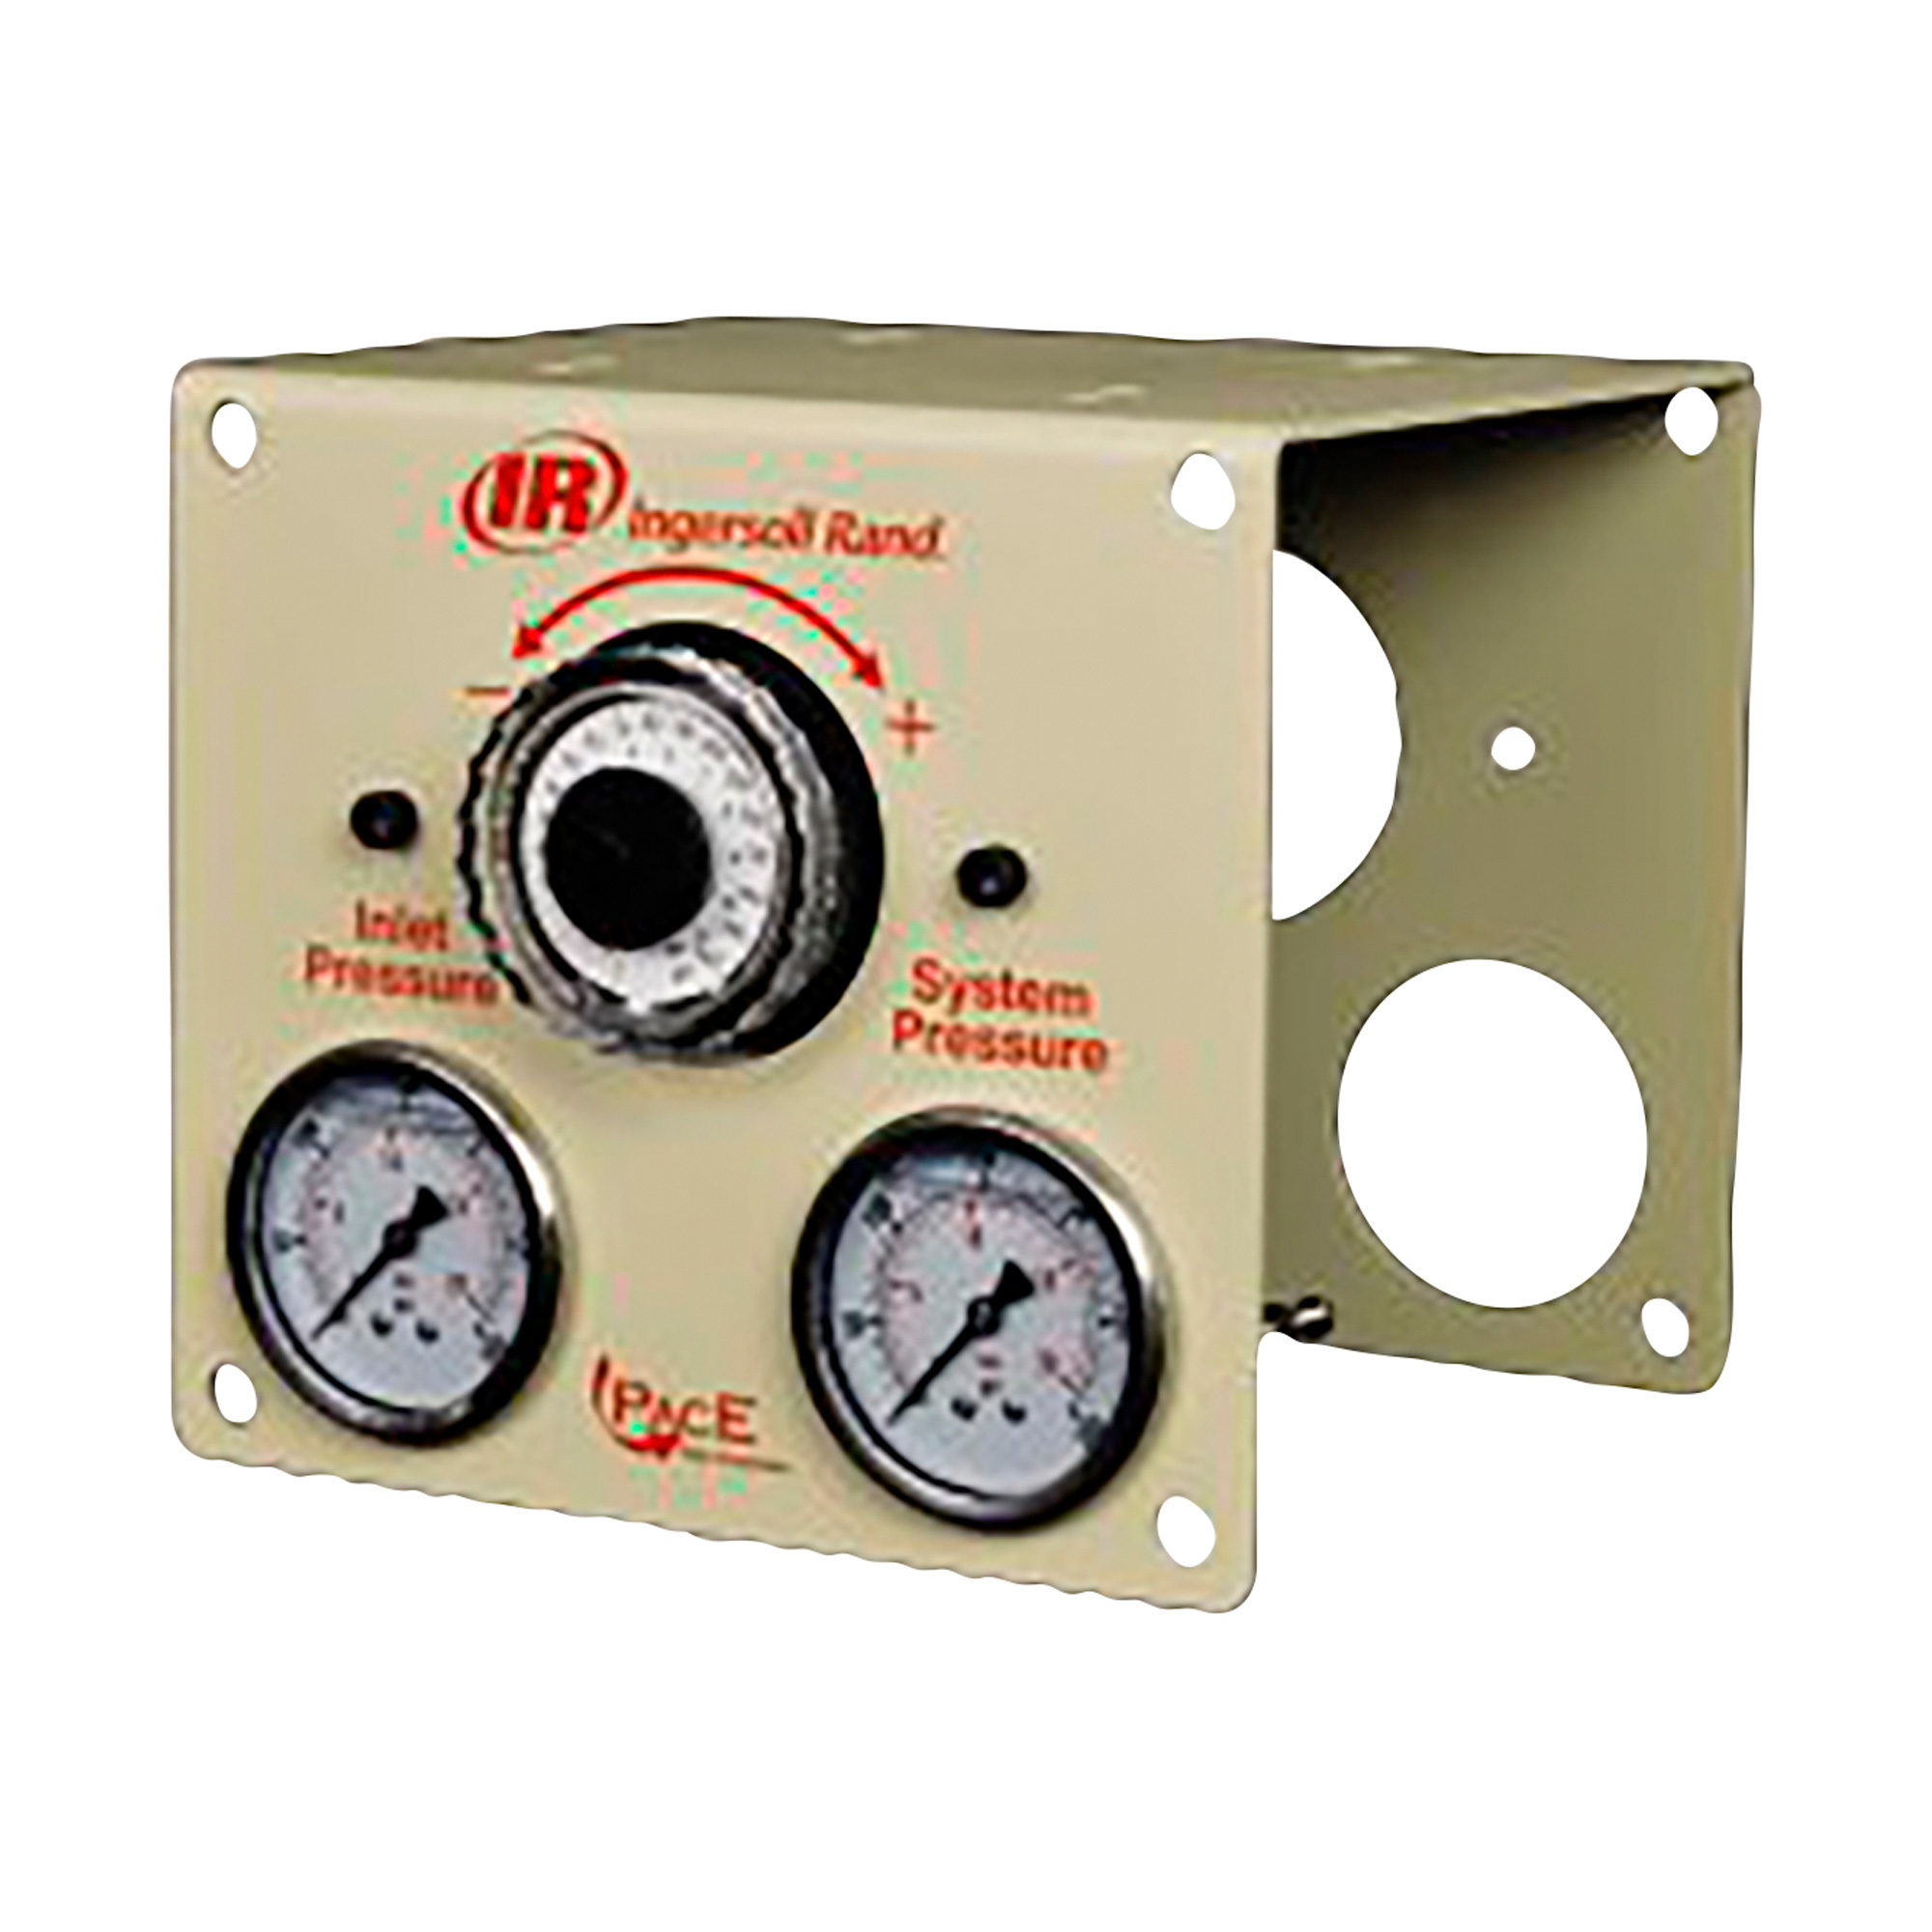 Ingersoll Rand PacE Flow Controller, 1/2Inch NPT, Left To Right Flow, Model 49124365